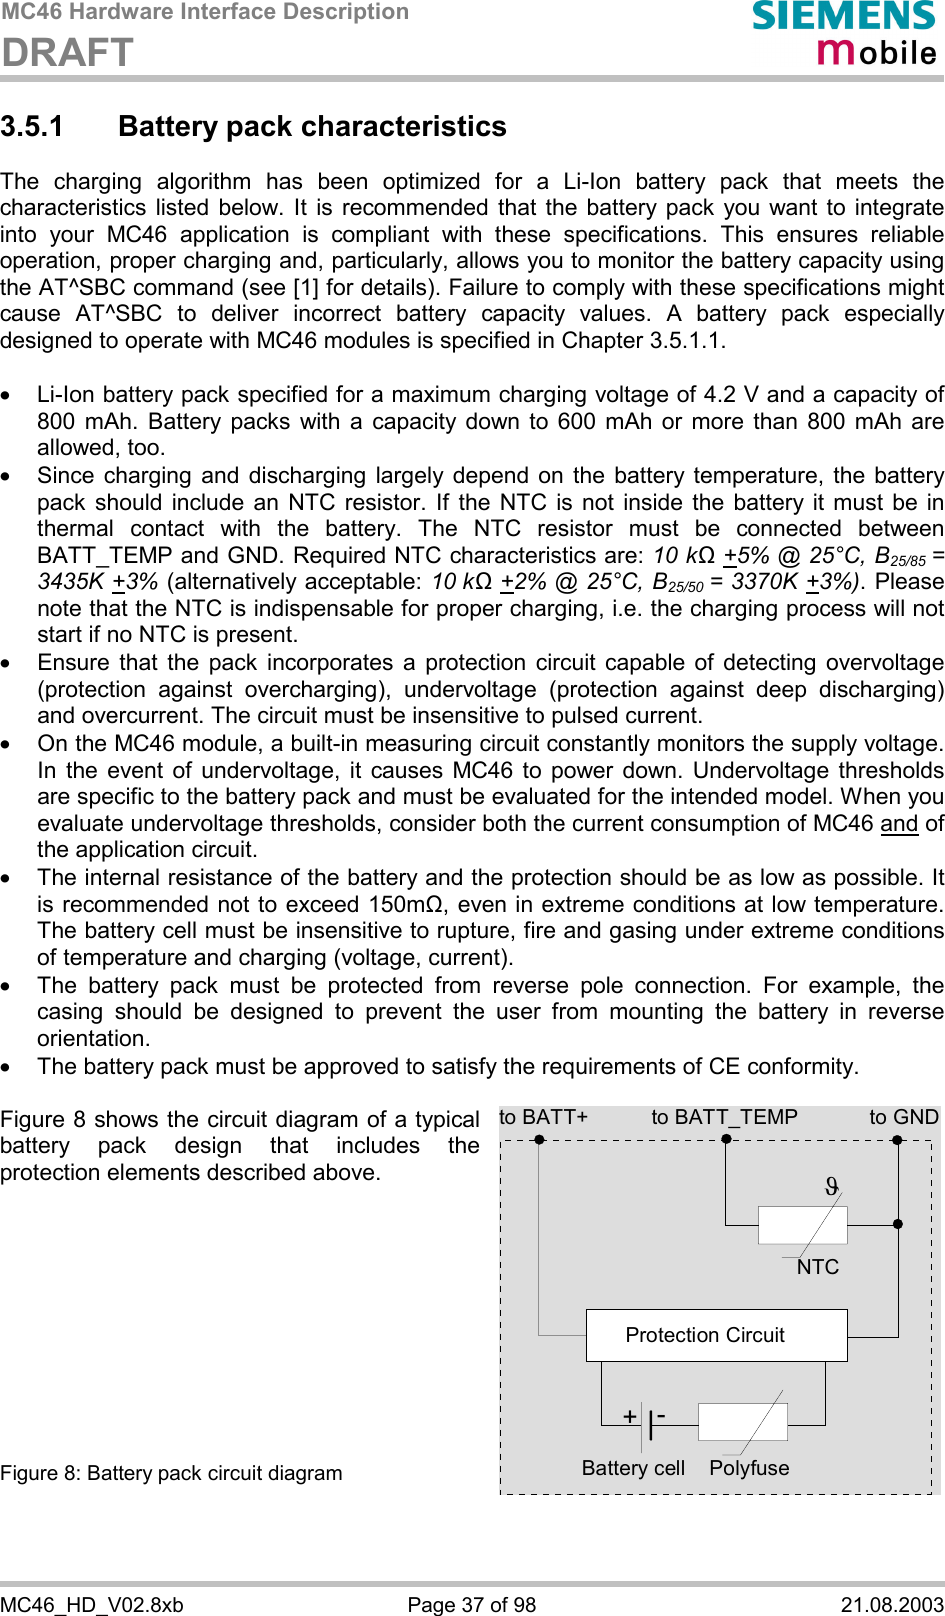 MC46 Hardware Interface Description DRAFT      MC46_HD_V02.8xb  Page 37 of 98  21.08.2003 3.5.1  Battery pack characteristics The charging algorithm has been optimized for a Li-Ion battery pack that meets the characteristics listed below. It is recommended that the battery pack you want to integrate into your MC46 application is compliant with these specifications. This ensures reliable operation, proper charging and, particularly, allows you to monitor the battery capacity using the AT^SBC command (see [1] for details). Failure to comply with these specifications might cause AT^SBC to deliver incorrect battery capacity values. A battery pack especially designed to operate with MC46 modules is specified in Chapter 3.5.1.1.  ·  Li-Ion battery pack specified for a maximum charging voltage of 4.2 V and a capacity of 800 mAh. Battery packs with a capacity down to 600 mAh or more than 800 mAh are allowed, too. ·  Since charging and discharging largely depend on the battery temperature, the battery pack should include an NTC resistor. If the NTC is not inside the battery it must be in thermal contact with the battery. The NTC resistor must be connected between BATT_TEMP and GND. Required NTC characteristics are: 10 kΩ +5% @ 25°C, B25/85 = 3435K +3% (alternatively acceptable: 10 kΩ +2% @ 25°C, B25/50  = 3370K +3%). Please note that the NTC is indispensable for proper charging, i.e. the charging process will not start if no NTC is present. ·  Ensure that the pack incorporates a protection circuit capable of detecting overvoltage (protection against overcharging), undervoltage (protection against deep discharging) and overcurrent. The circuit must be insensitive to pulsed current. ·  On the MC46 module, a built-in measuring circuit constantly monitors the supply voltage. In the event of undervoltage, it causes MC46 to power down. Undervoltage thresholds are specific to the battery pack and must be evaluated for the intended model. When you evaluate undervoltage thresholds, consider both the current consumption of MC46 and of the application circuit.  ·  The internal resistance of the battery and the protection should be as low as possible. It is recommended not to exceed 150m&quot;, even in extreme conditions at low temperature. The battery cell must be insensitive to rupture, fire and gasing under extreme conditions of temperature and charging (voltage, current). ·  The battery pack must be protected from reverse pole connection. For example, the casing should be designed to prevent the user from mounting the battery in reverse orientation. ·  The battery pack must be approved to satisfy the requirements of CE conformity.  Figure 8 shows the circuit diagram of a typical battery pack design that includes the protection elements described above.           Figure 8: Battery pack circuit diagram to BATT_TEMP to GNDNTCPolyfuseJProtection Circuit+-Battery cellto BATT+